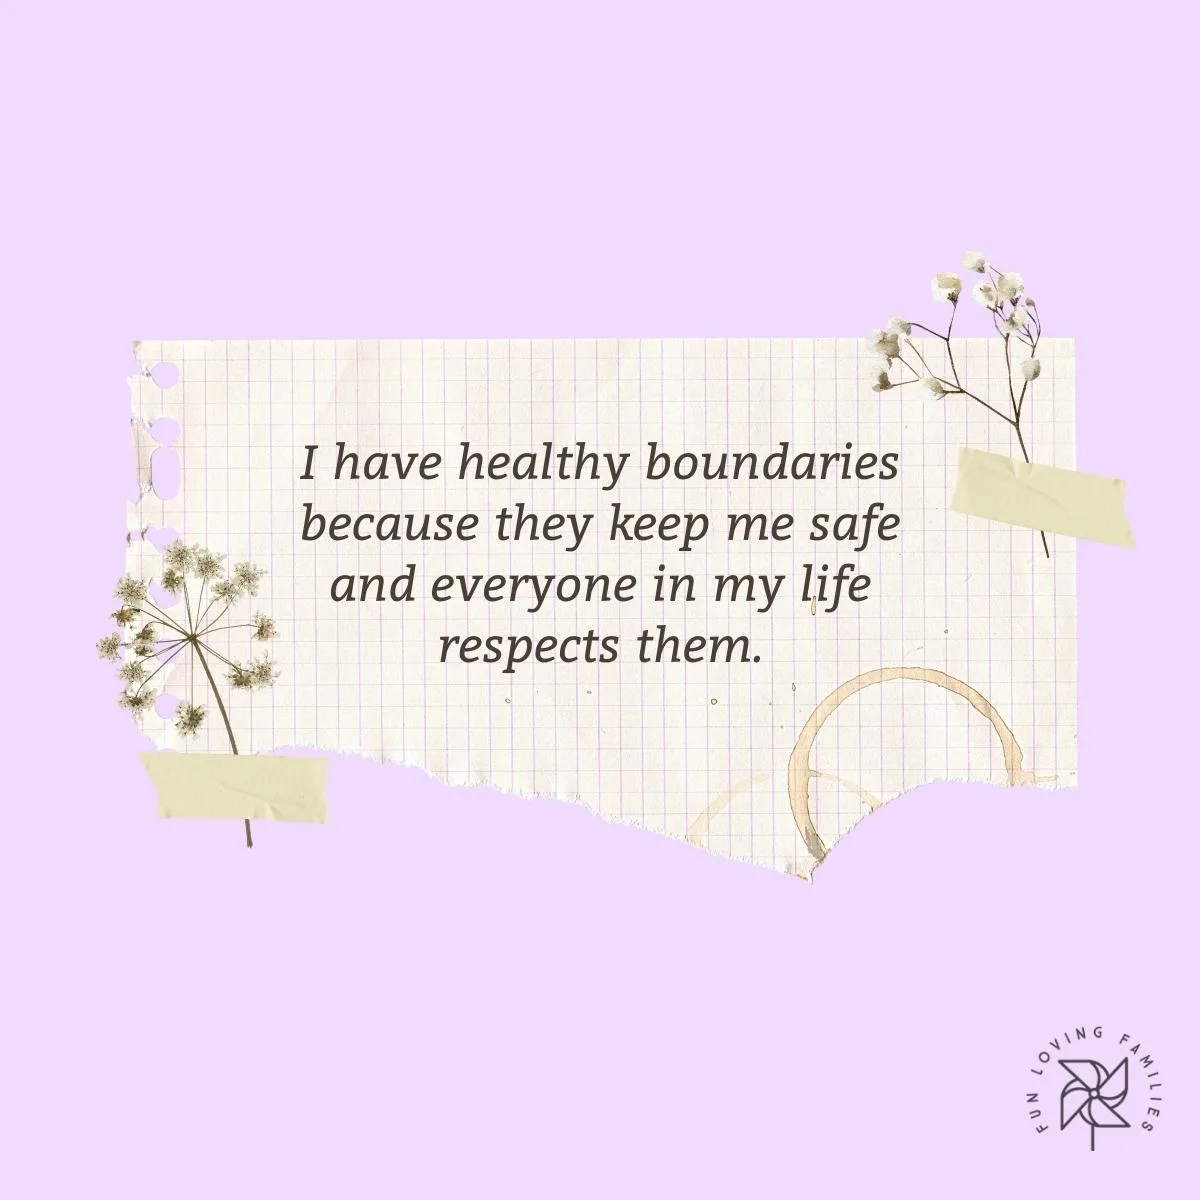 I have healthy boundaries because they keep me safe and everyone in my life respects them affirmation image